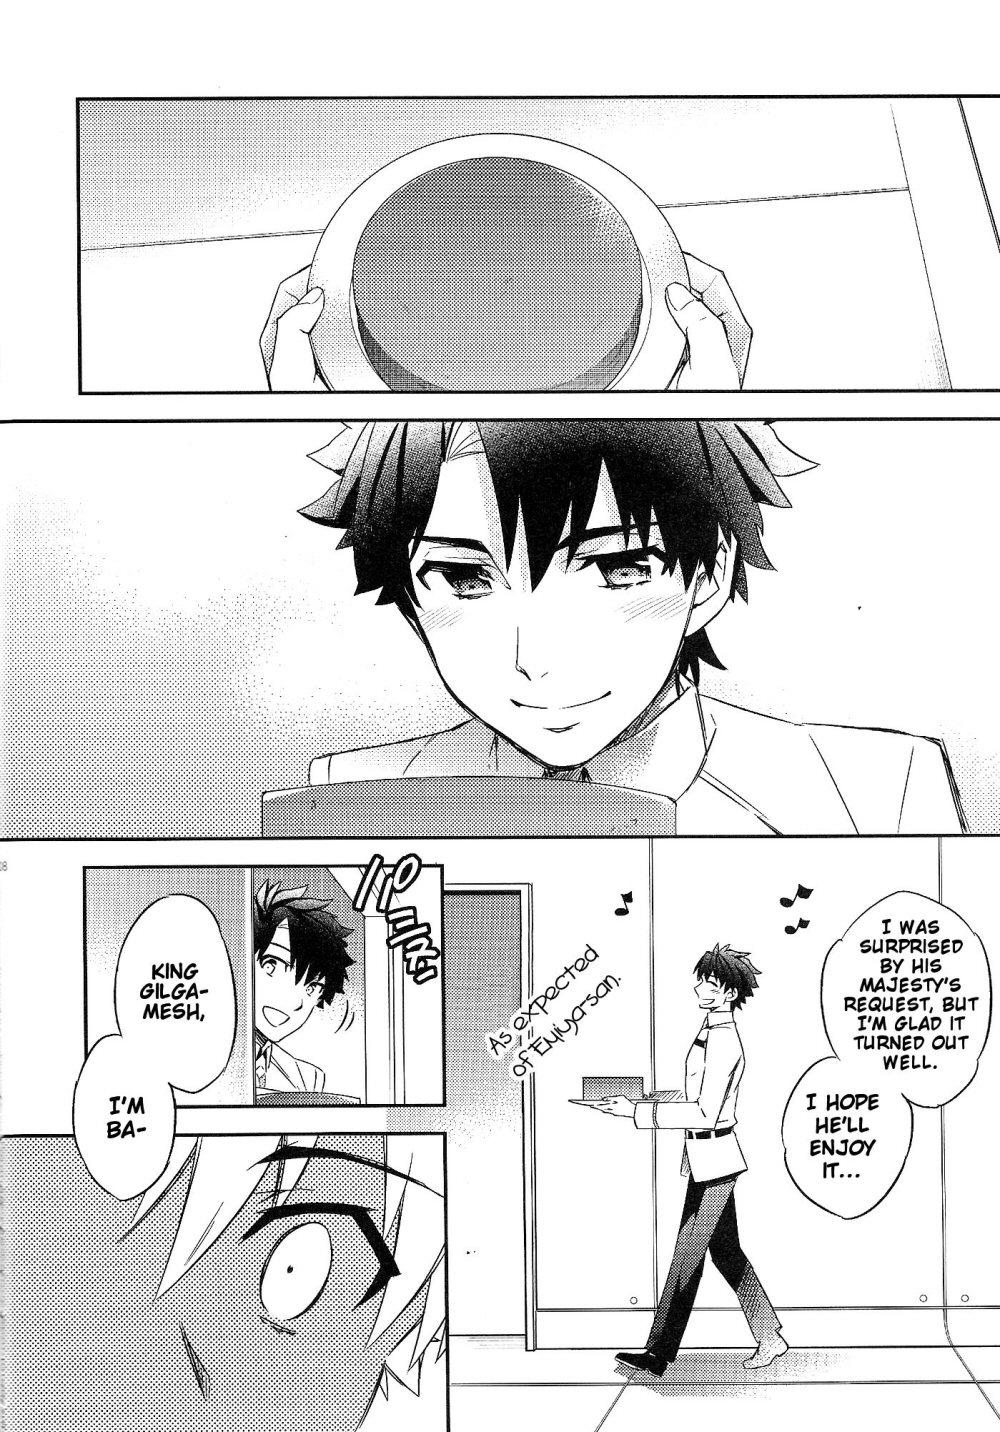 Gay Medical Shinen ni Itaru Koi | Love That Leads To The Abyss - Fate grand order Amazing - Page 4